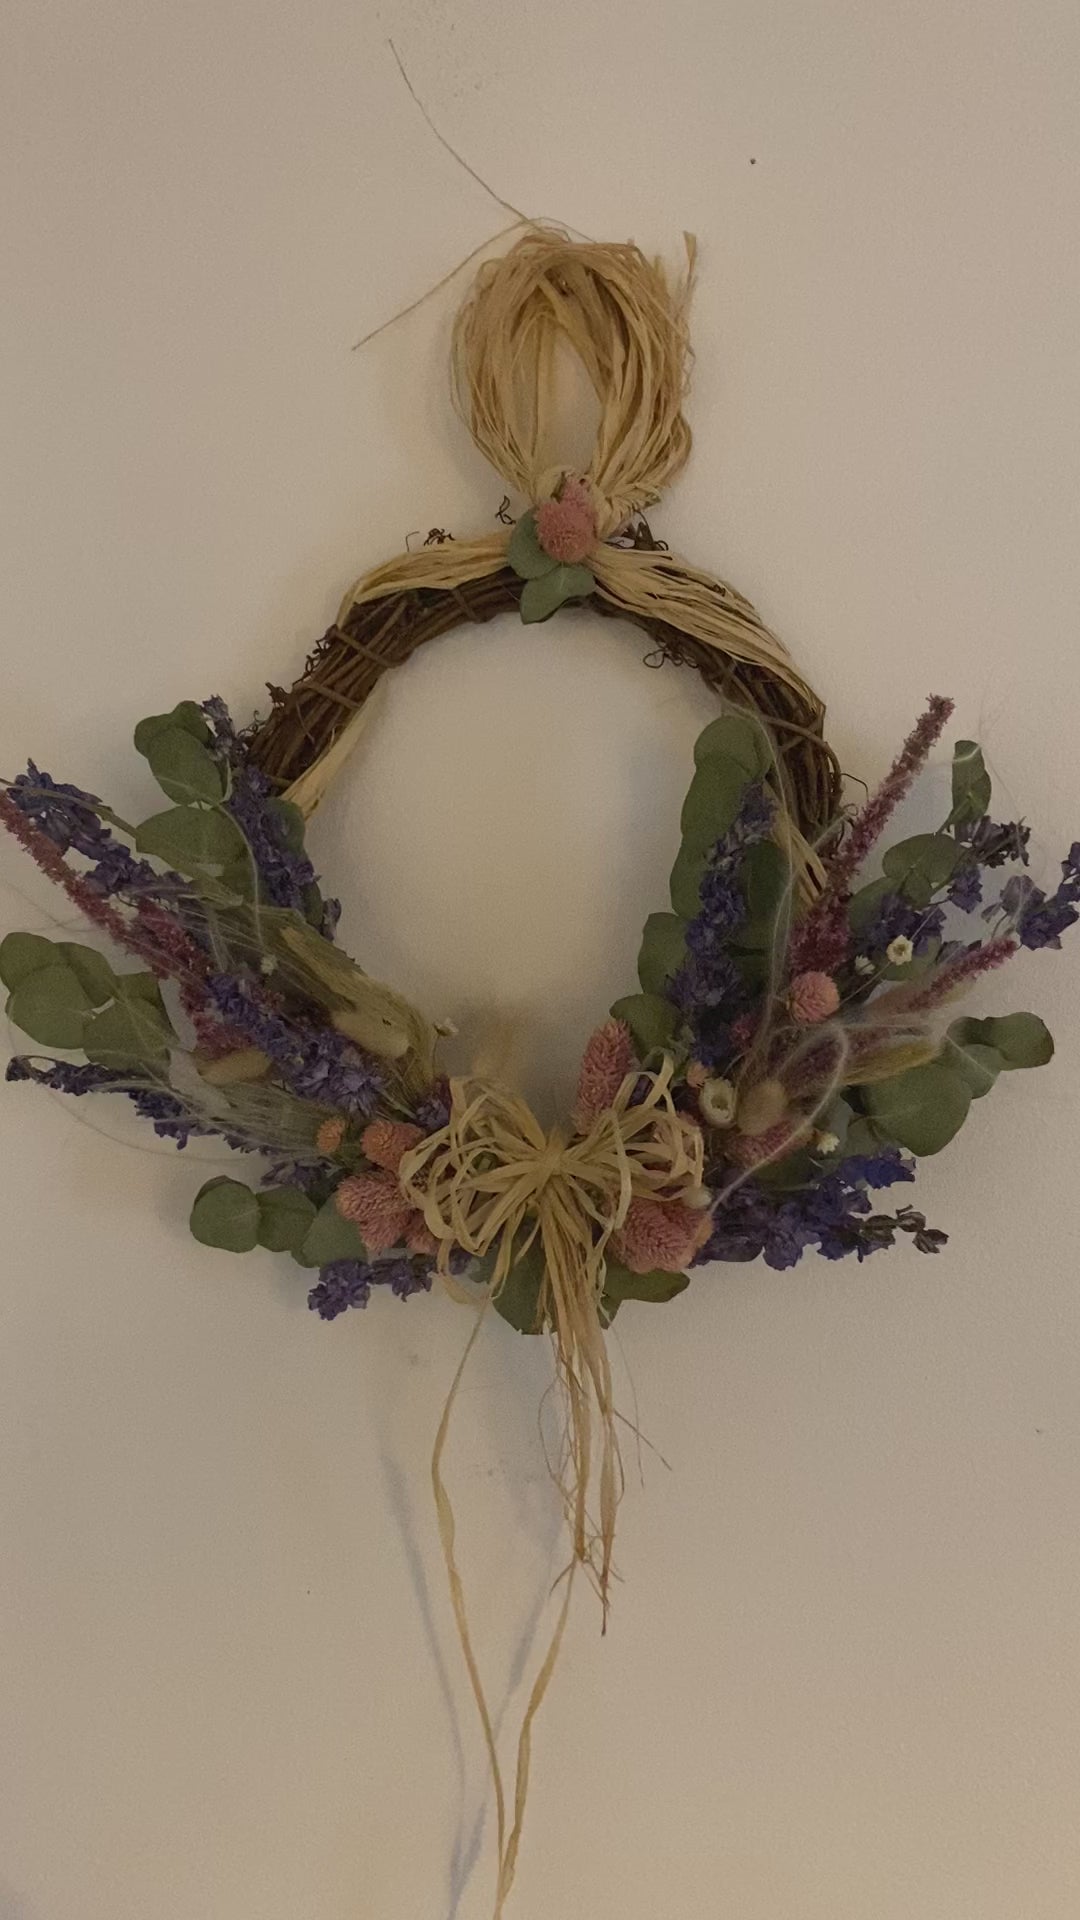 Botanical Natural hanging Dried Flower wreath wall art decoration